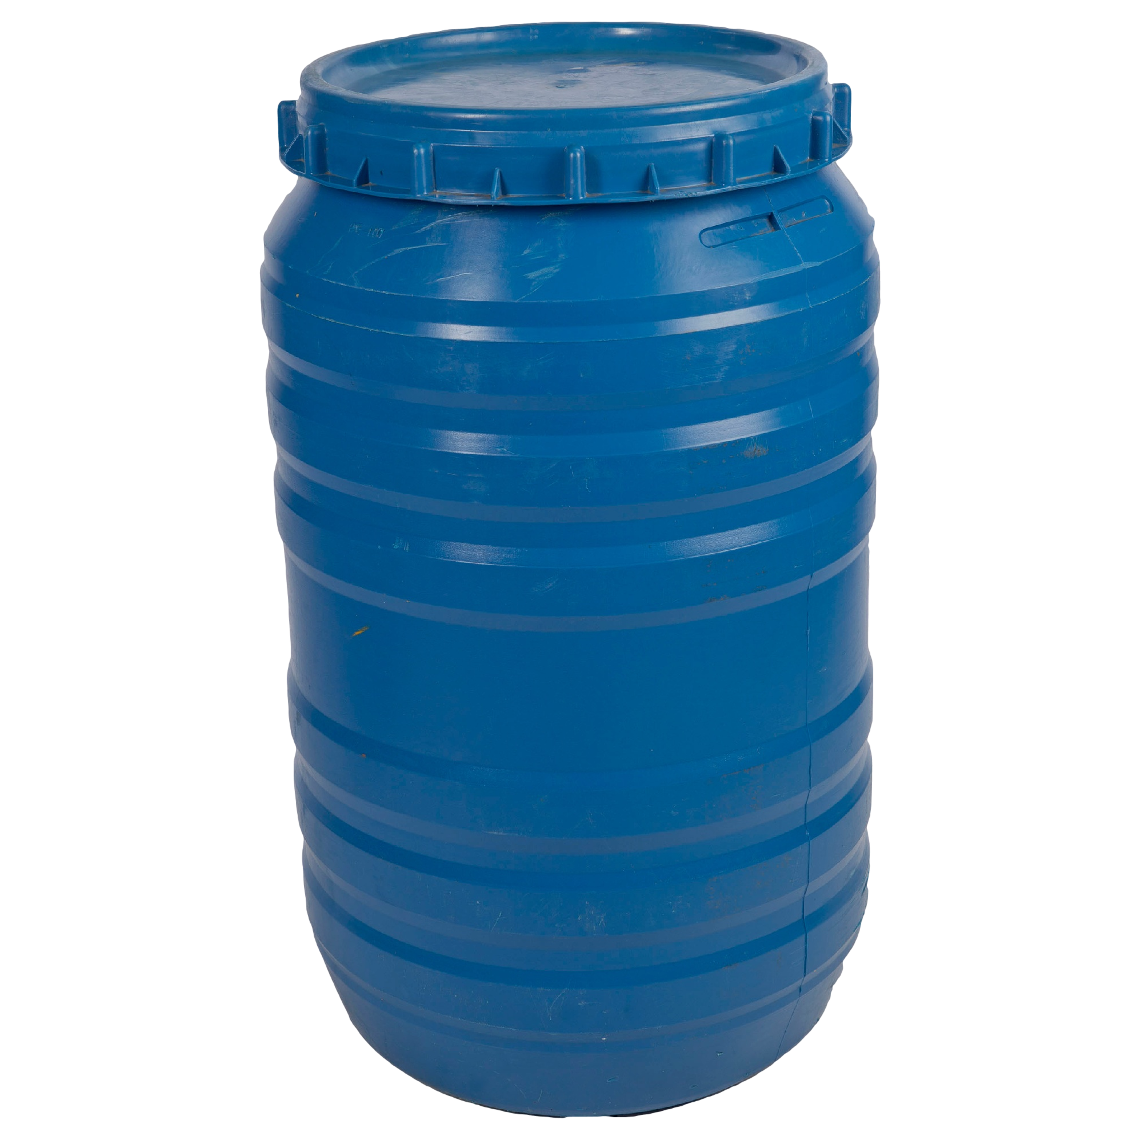 Used Food Grade 55 Gallon Drums For Sale - Food Ideas.